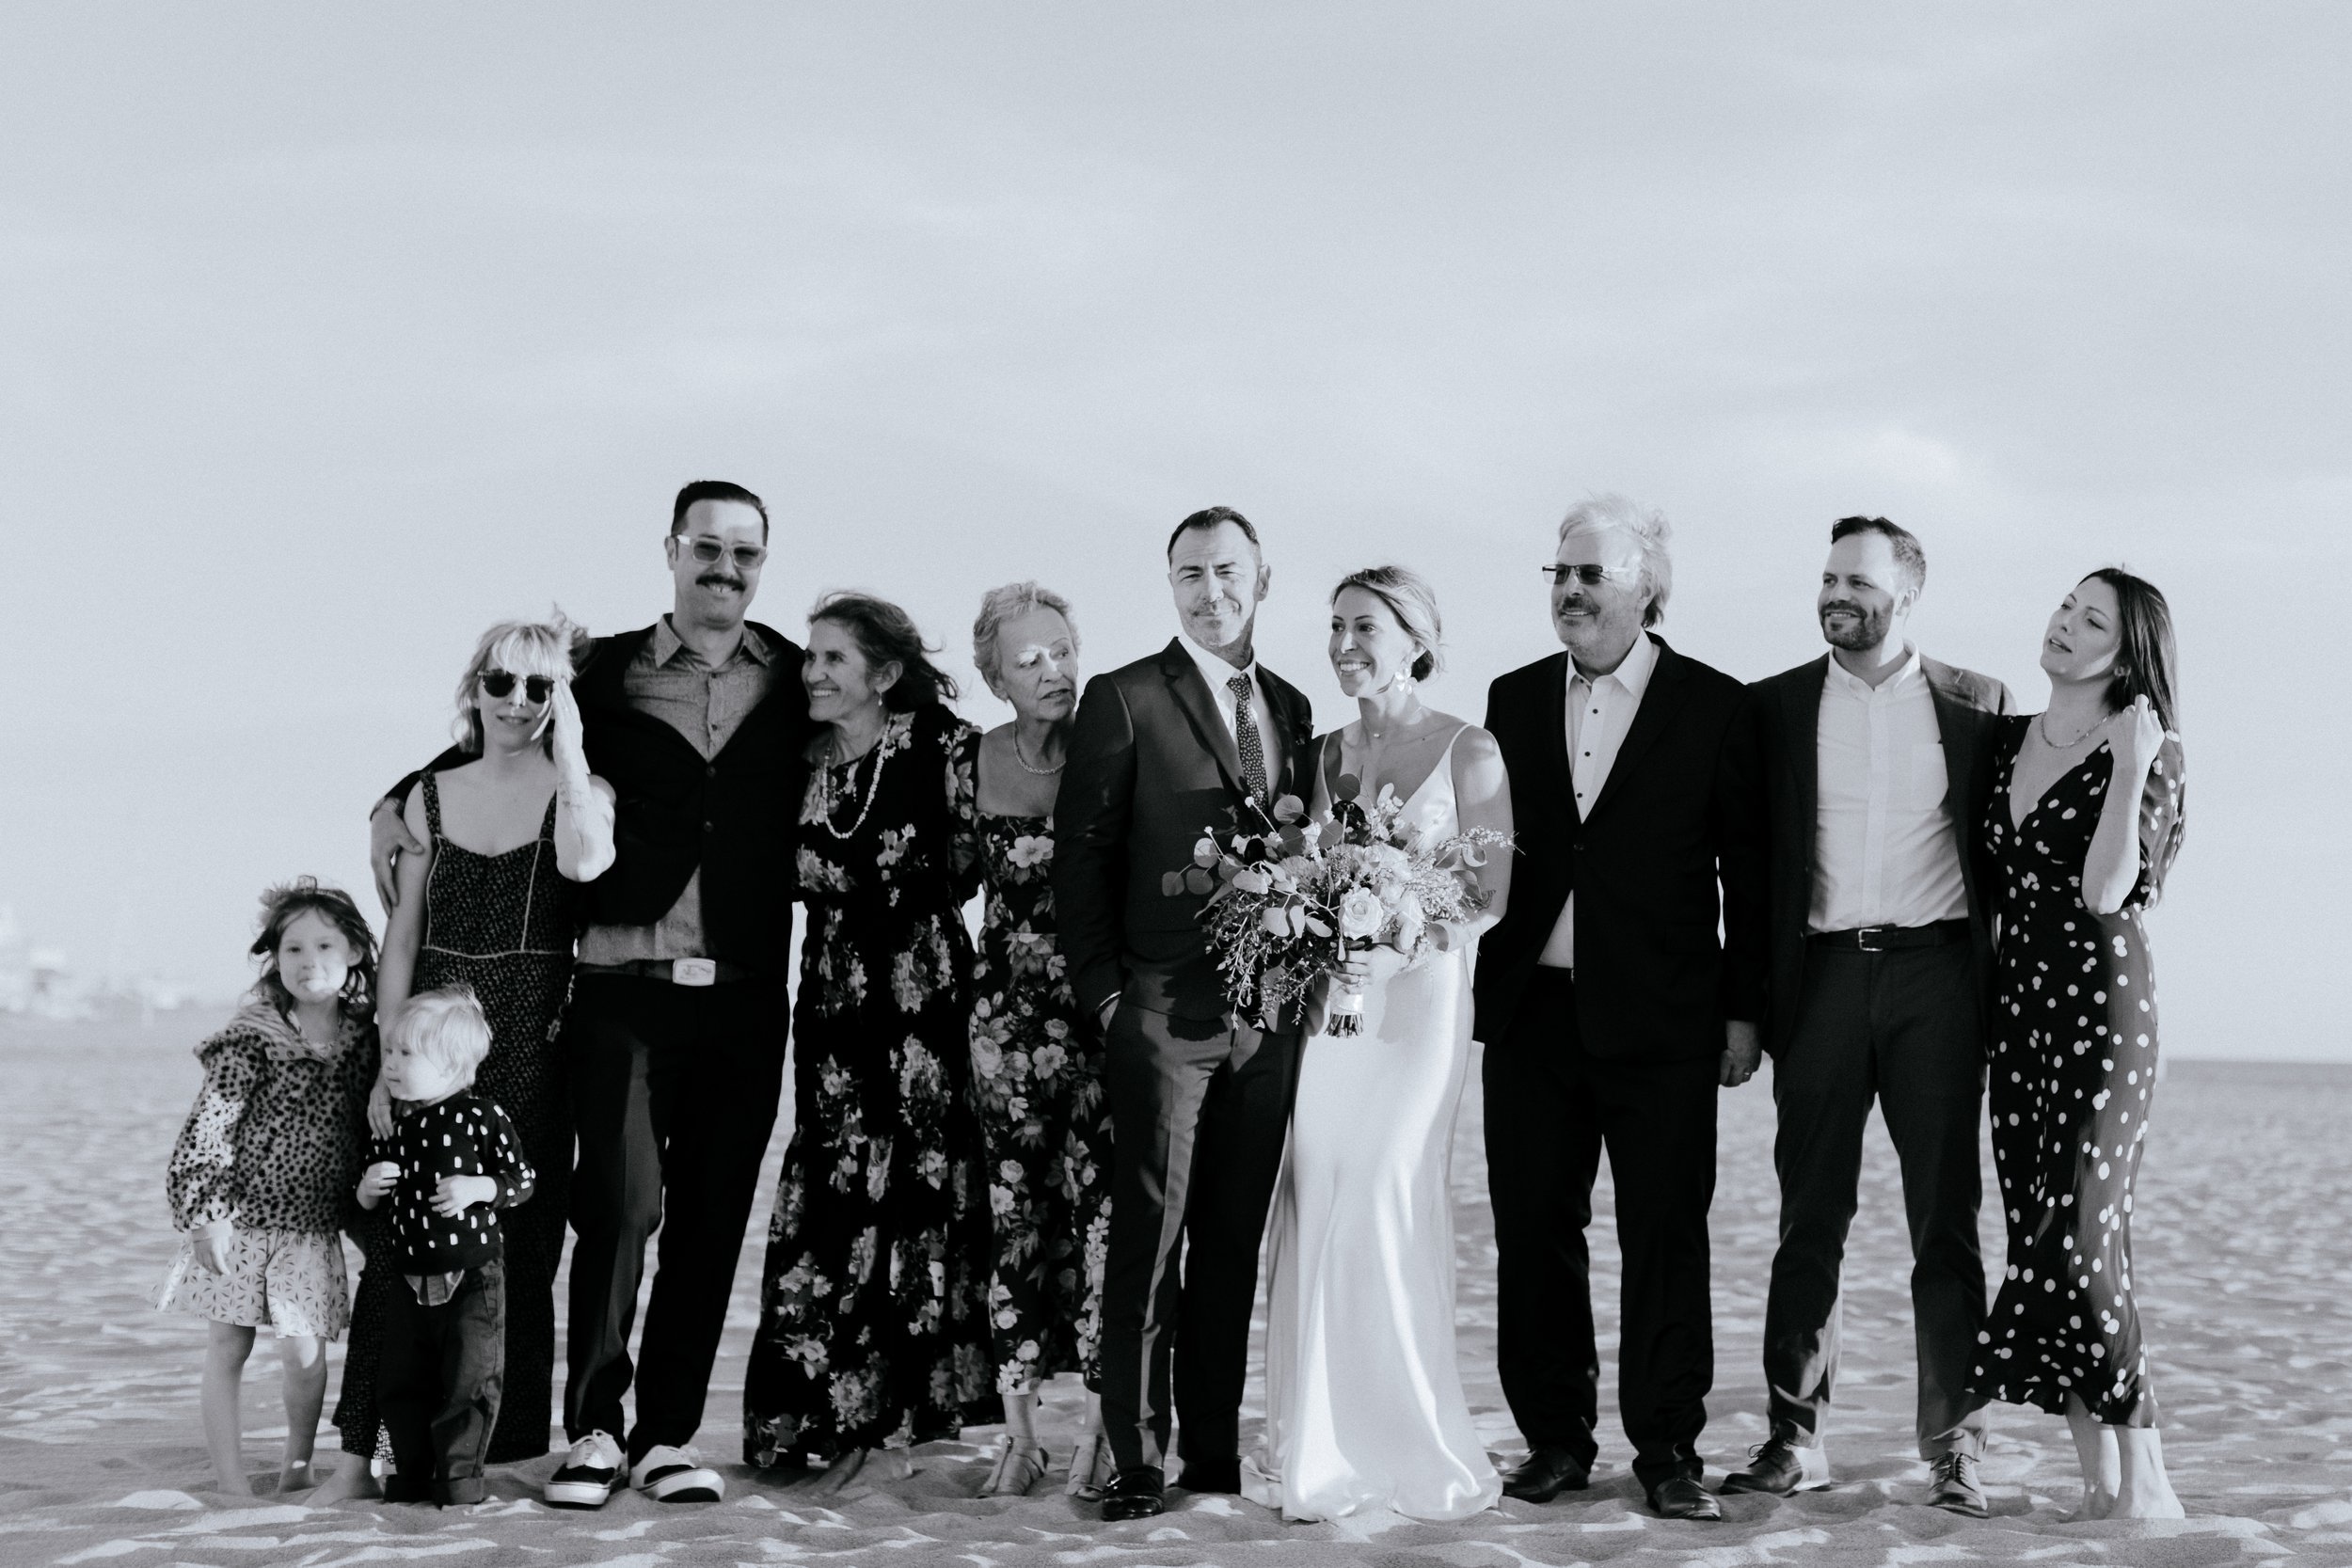 www.santabarbarawedding.com | Chris J. Evans | Paul Smith Suit | Couple with Their Families on the Beach